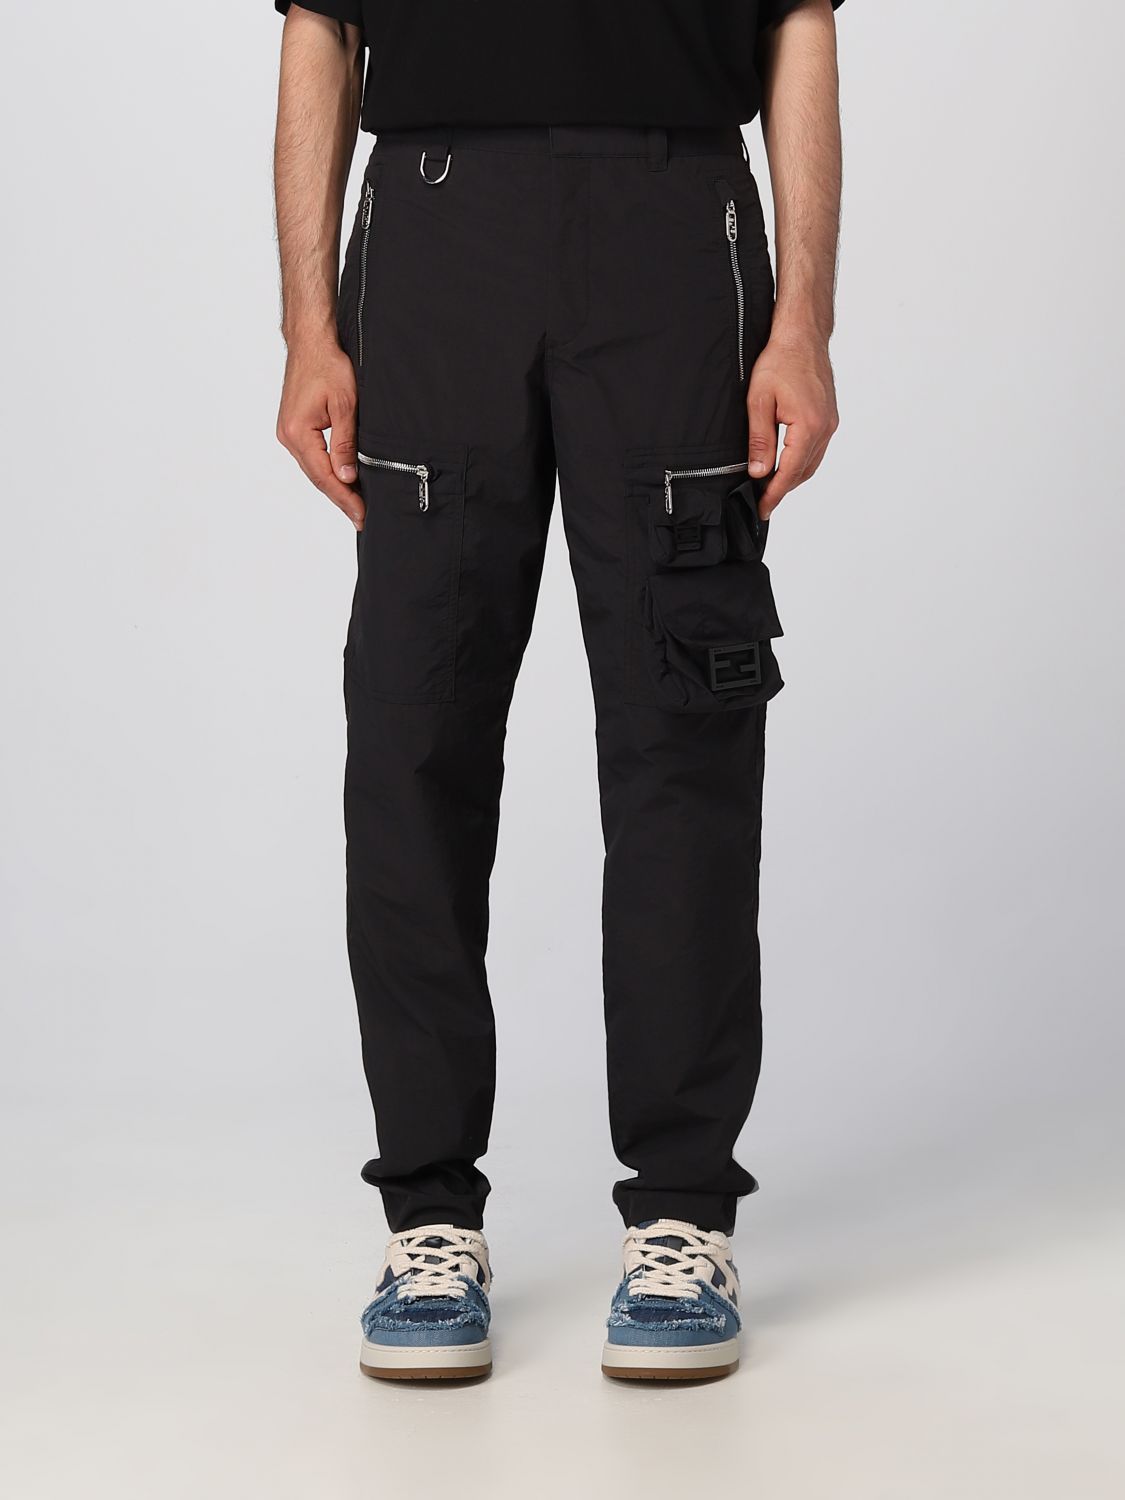 Mens Fendi Pants  Best Deals You Need To See